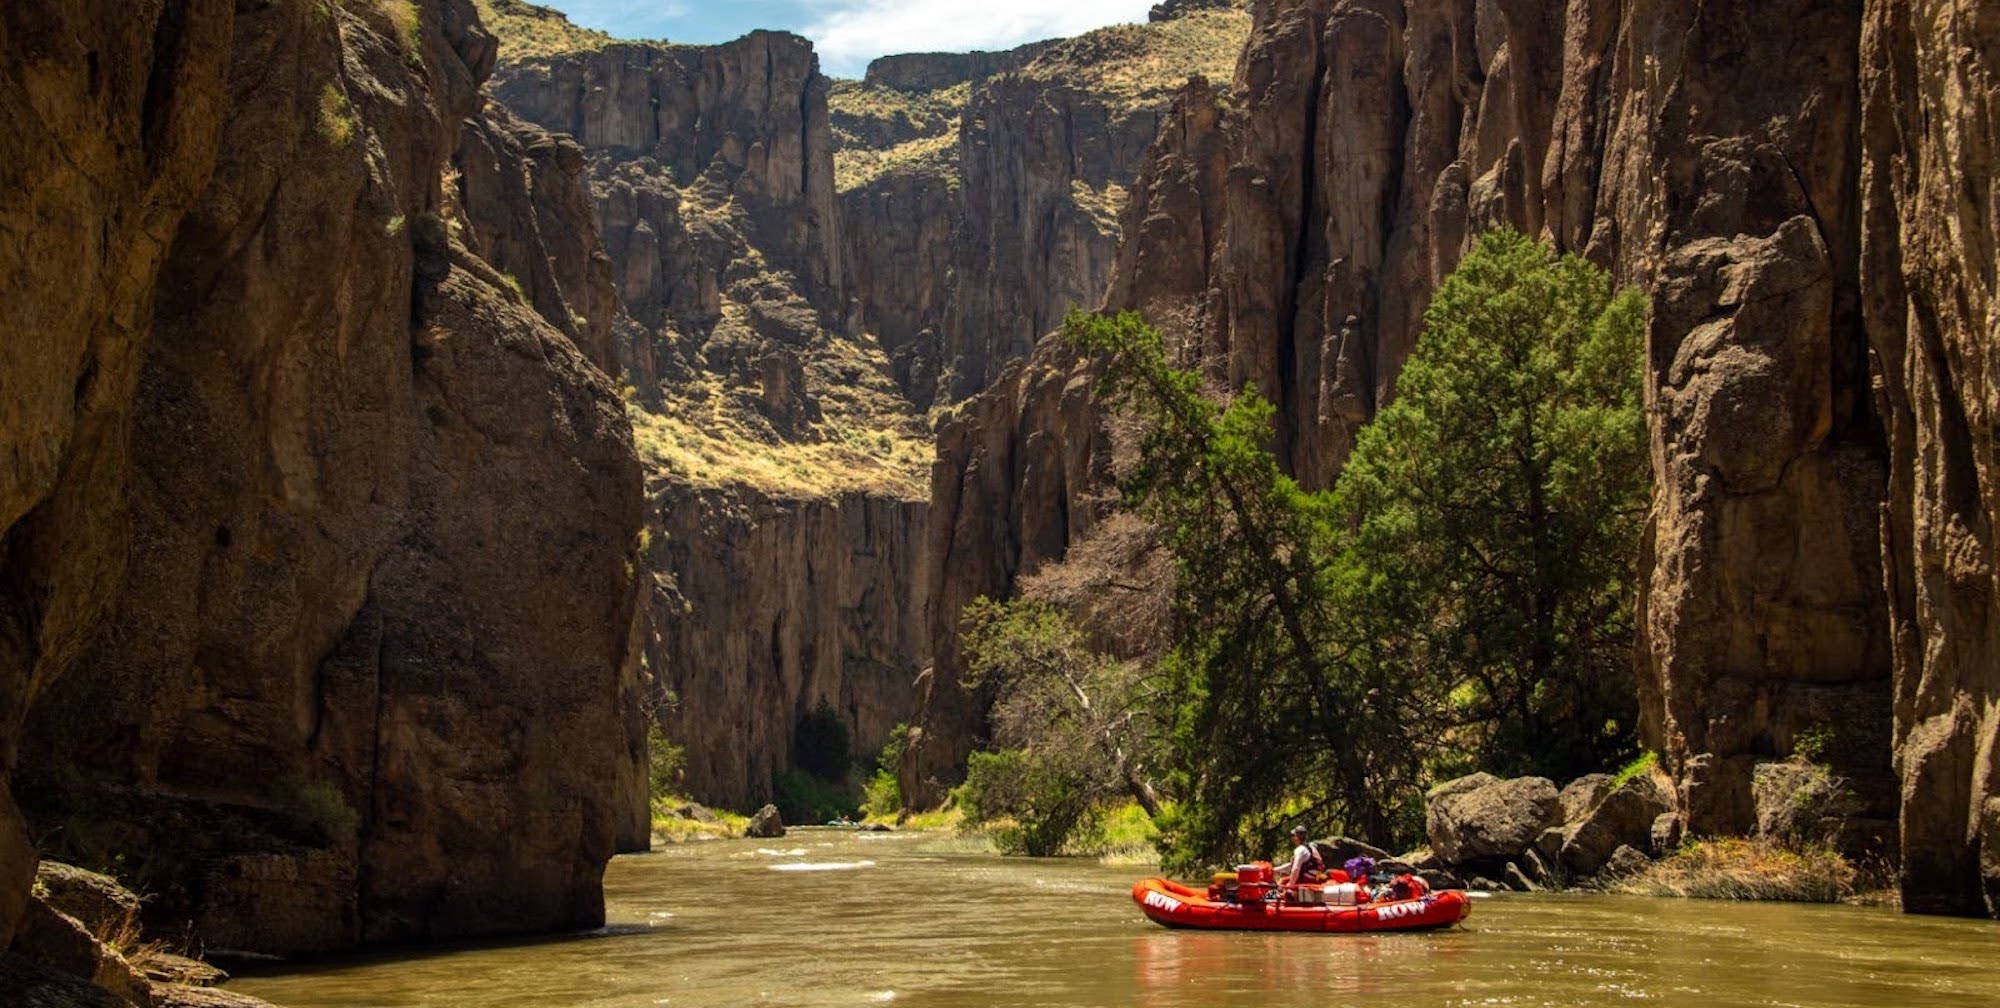 Person rowing a red raft down the Bruneau River in Southwestern Idaho